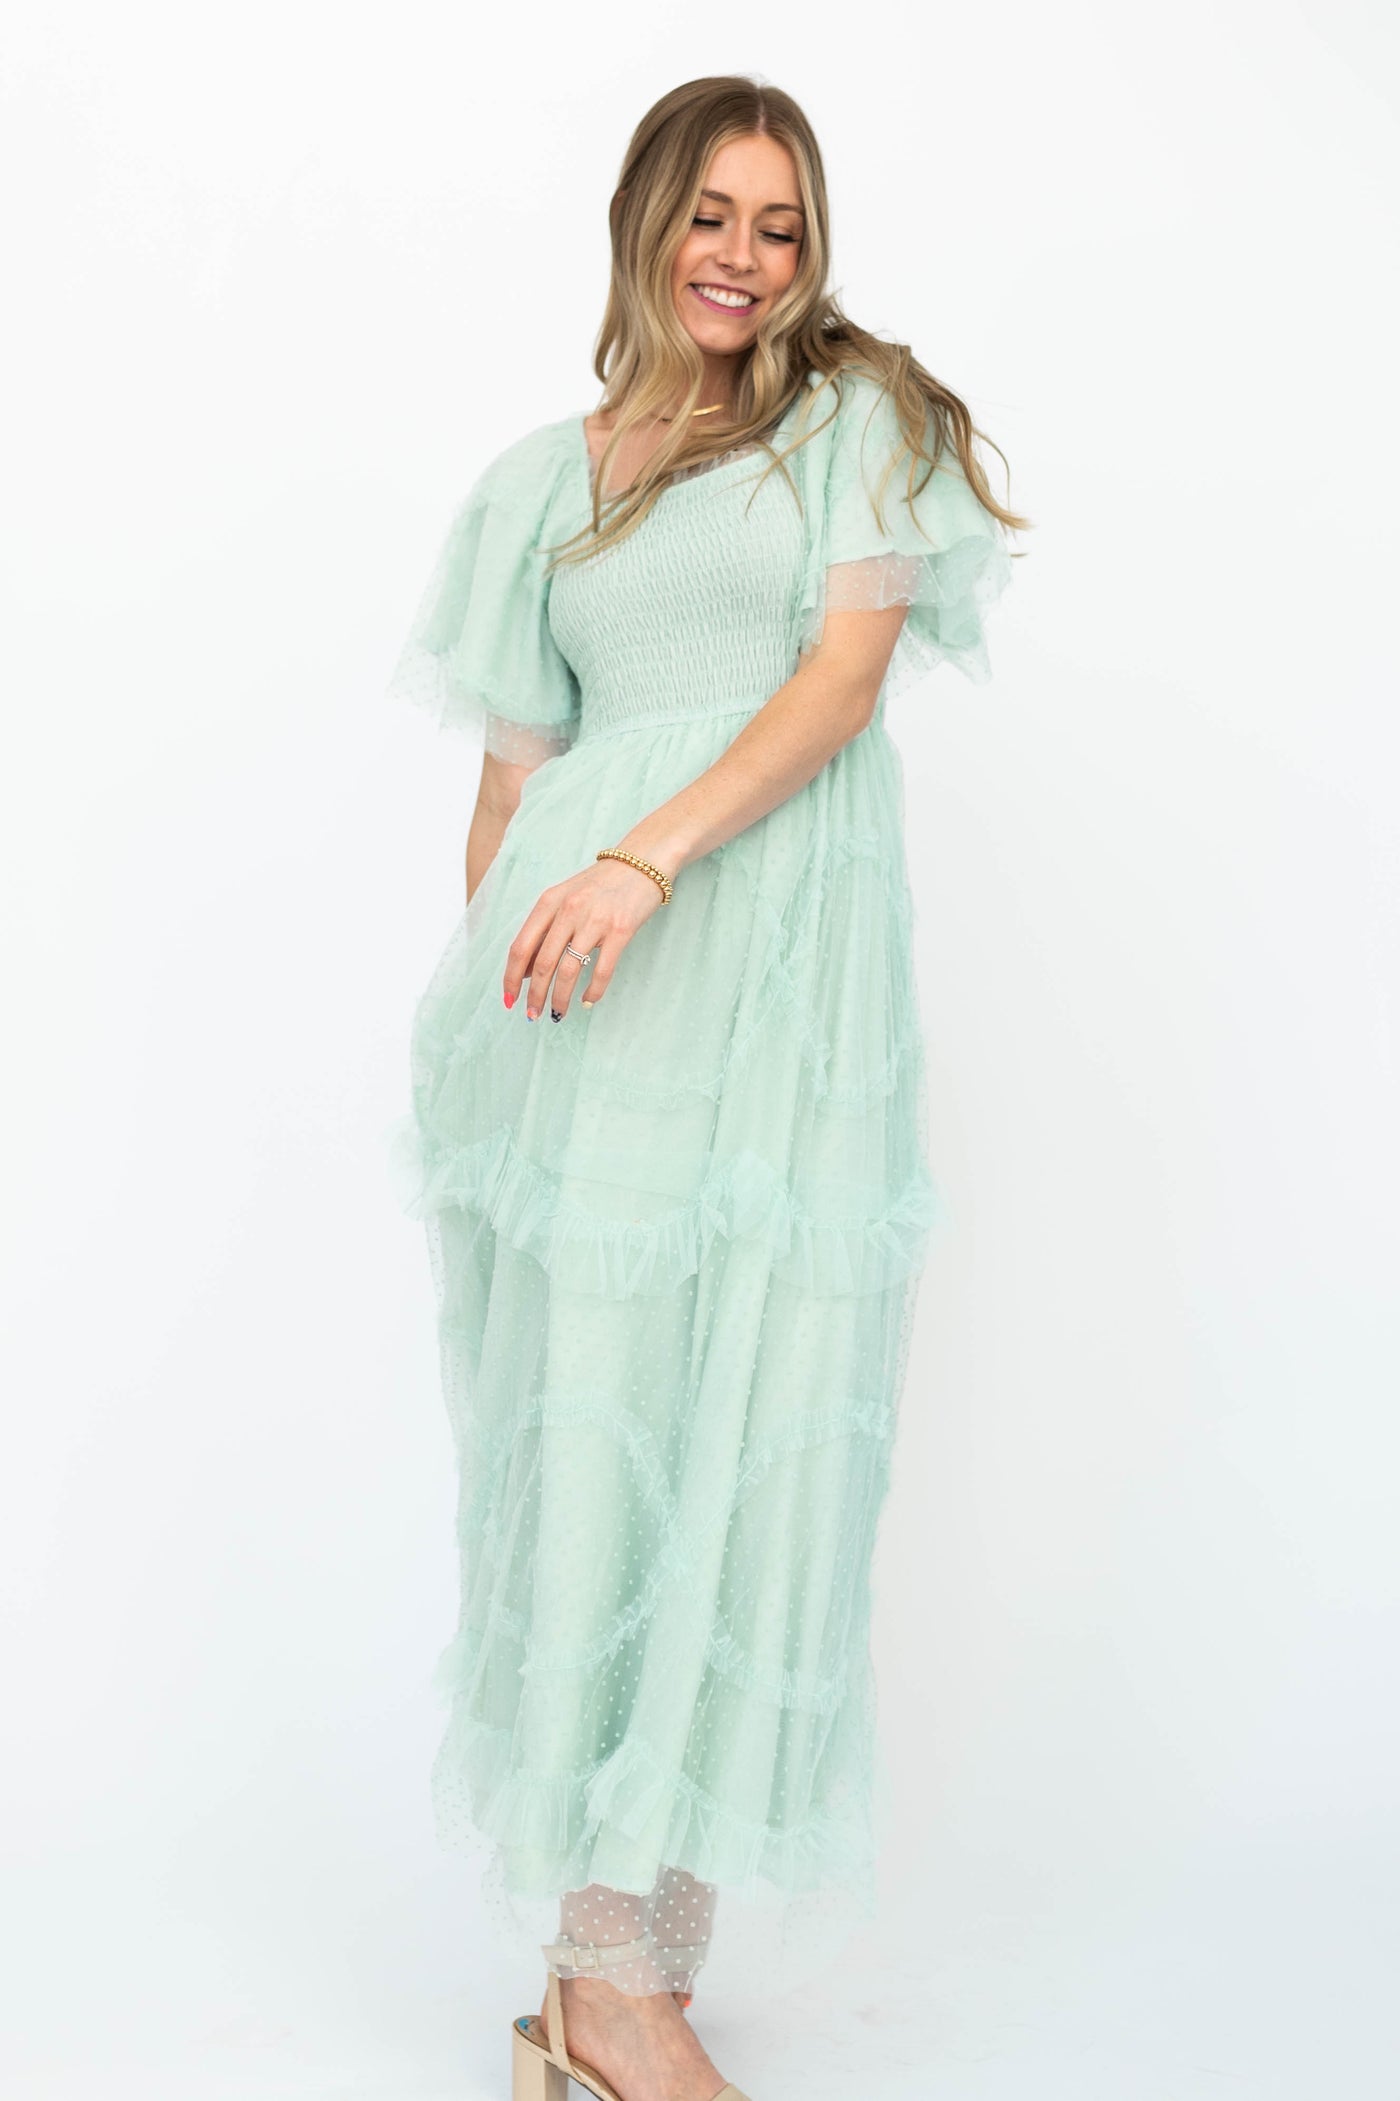 Short sleeve mint dress with tiered skirt